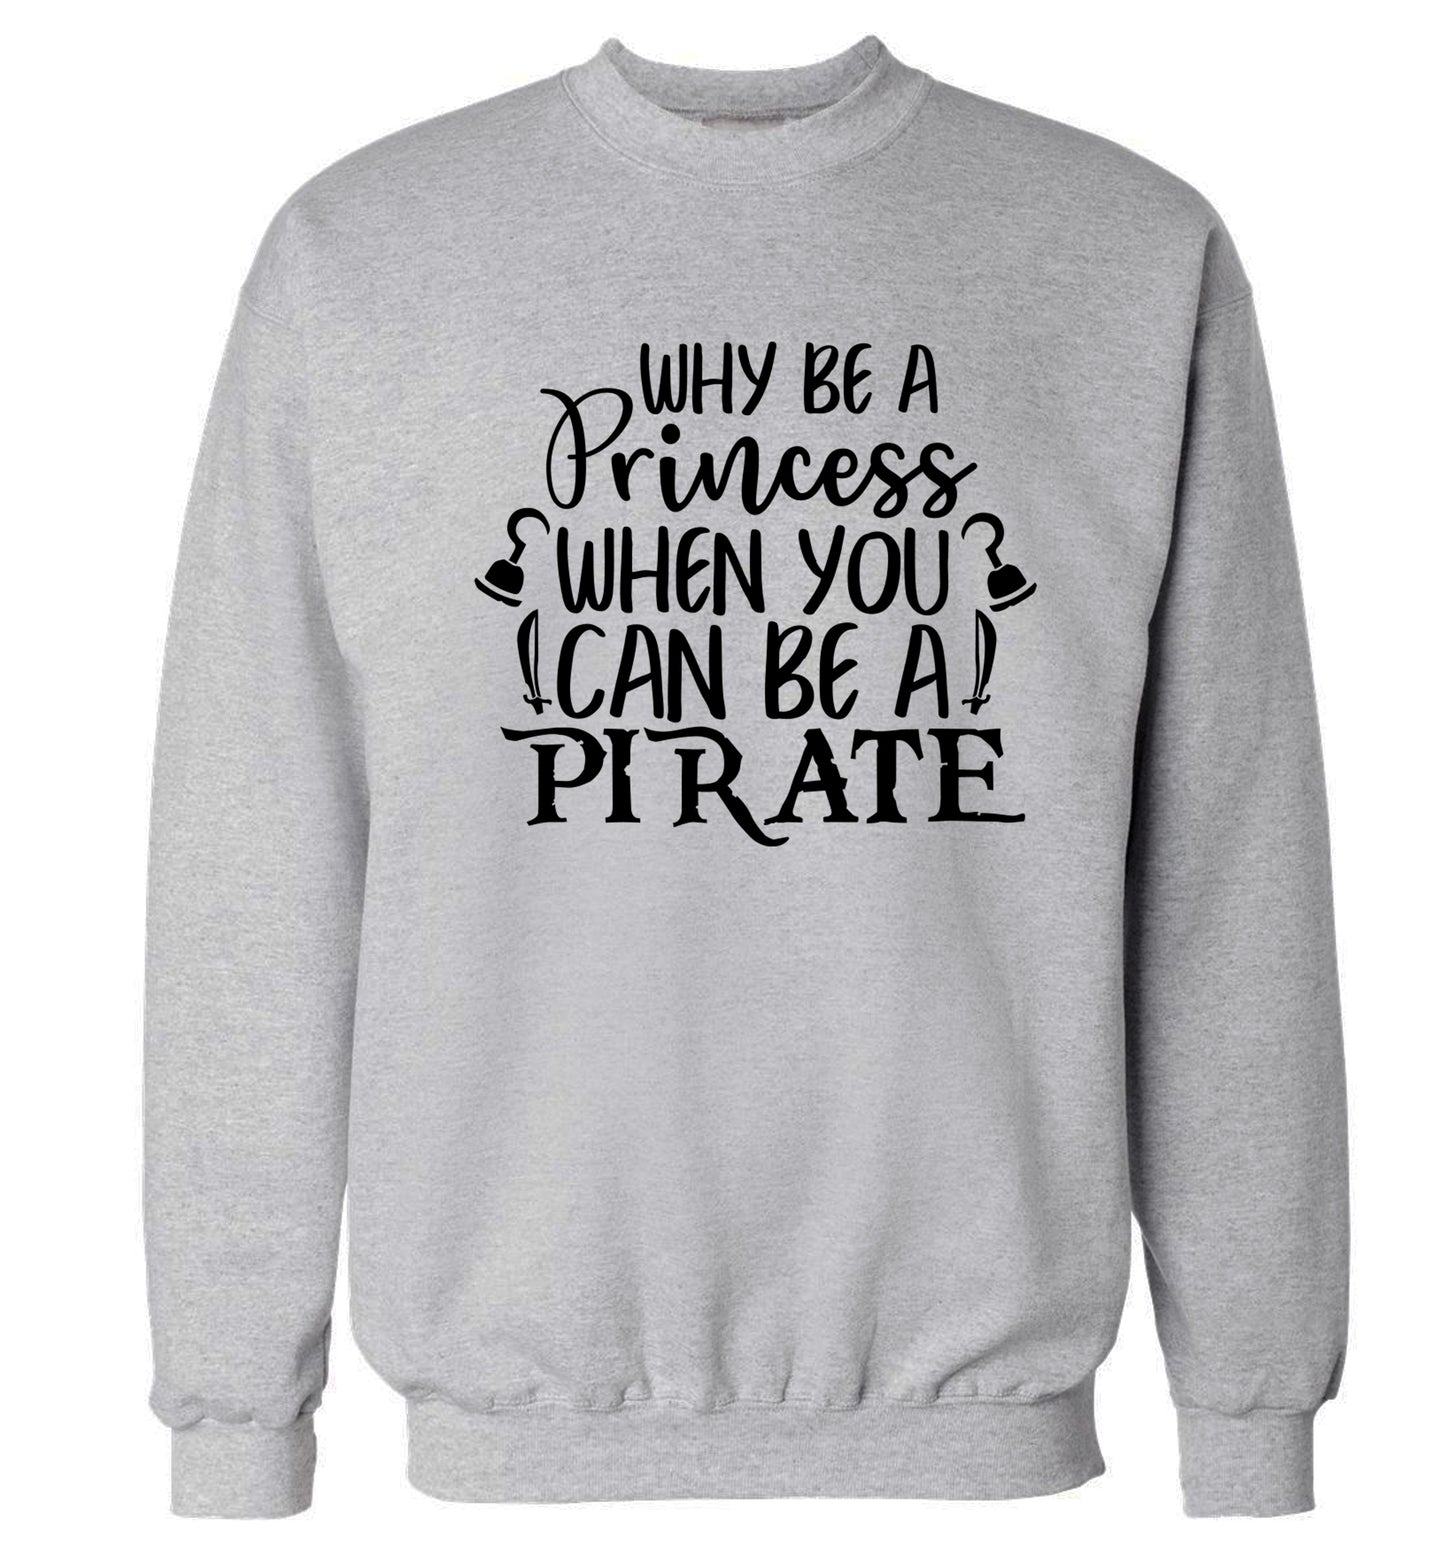 Why be a princess when you can be a pirate? Adult's unisex grey Sweater 2XL